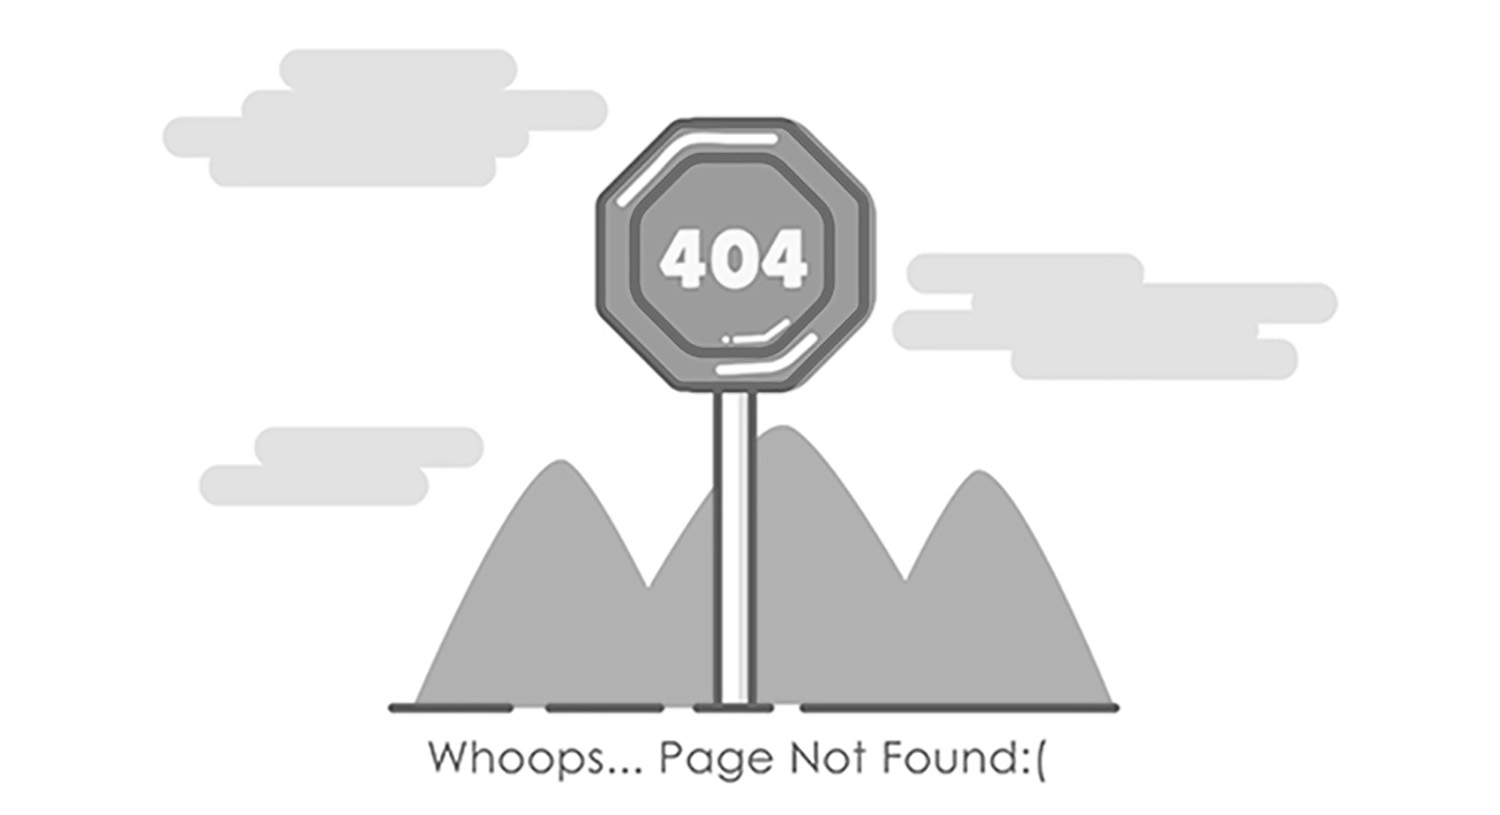 Page 404 Not Found. Flat Illustration